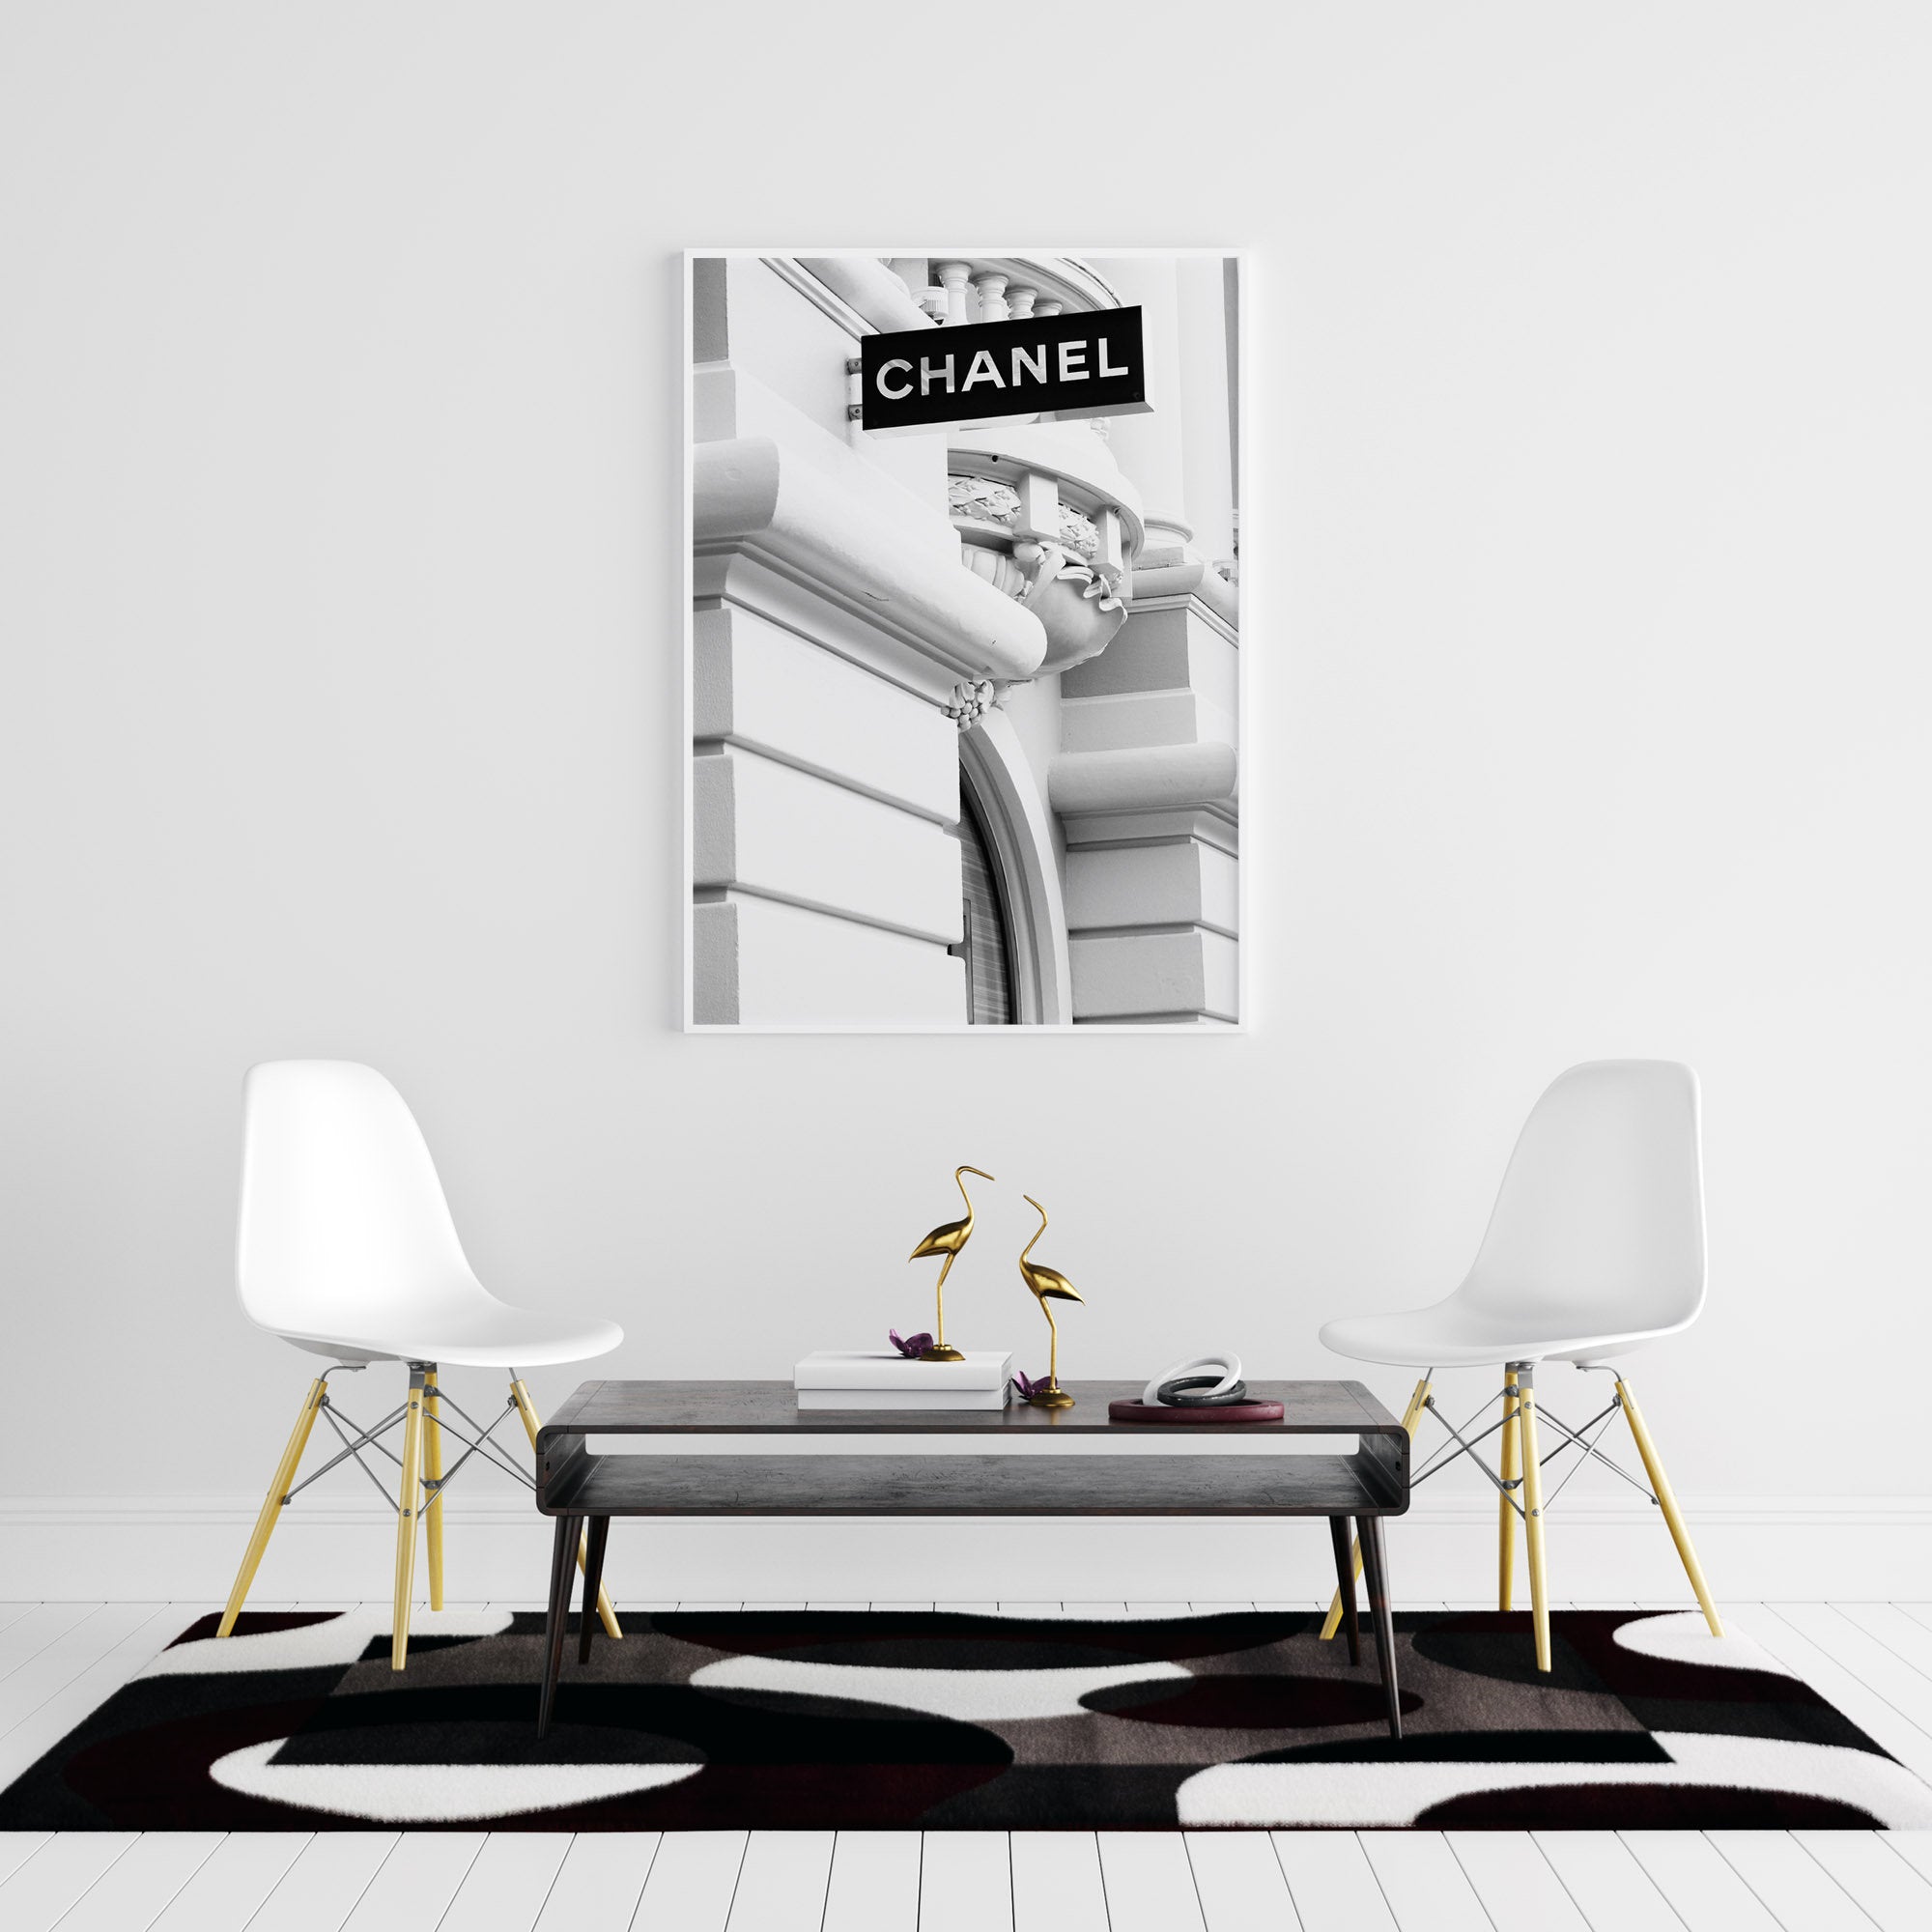 Chanel Store No1 Poster, Mode